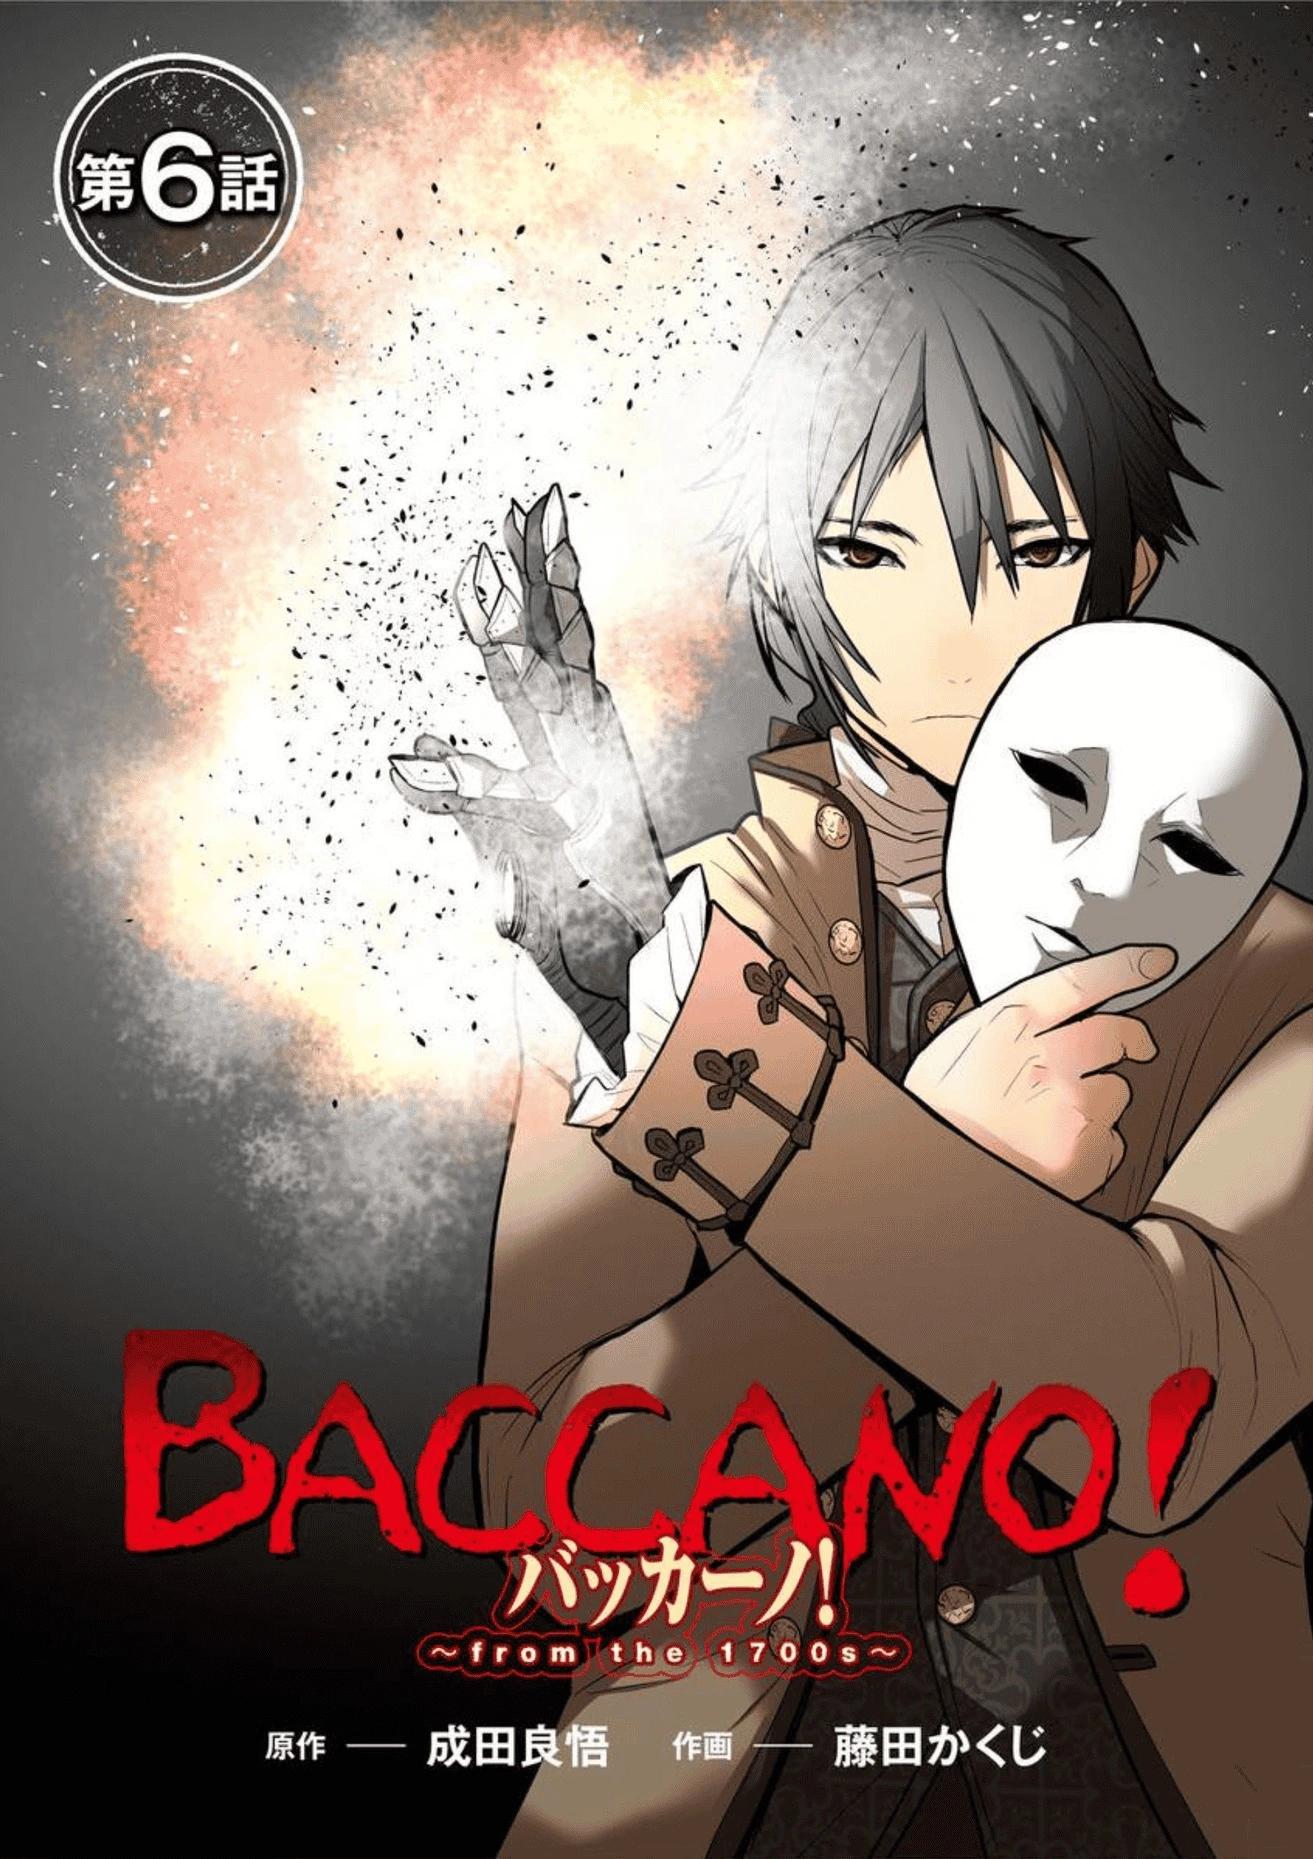 BACCANO! 永生之酒！~from the 1700s~ - 第06話 - 1